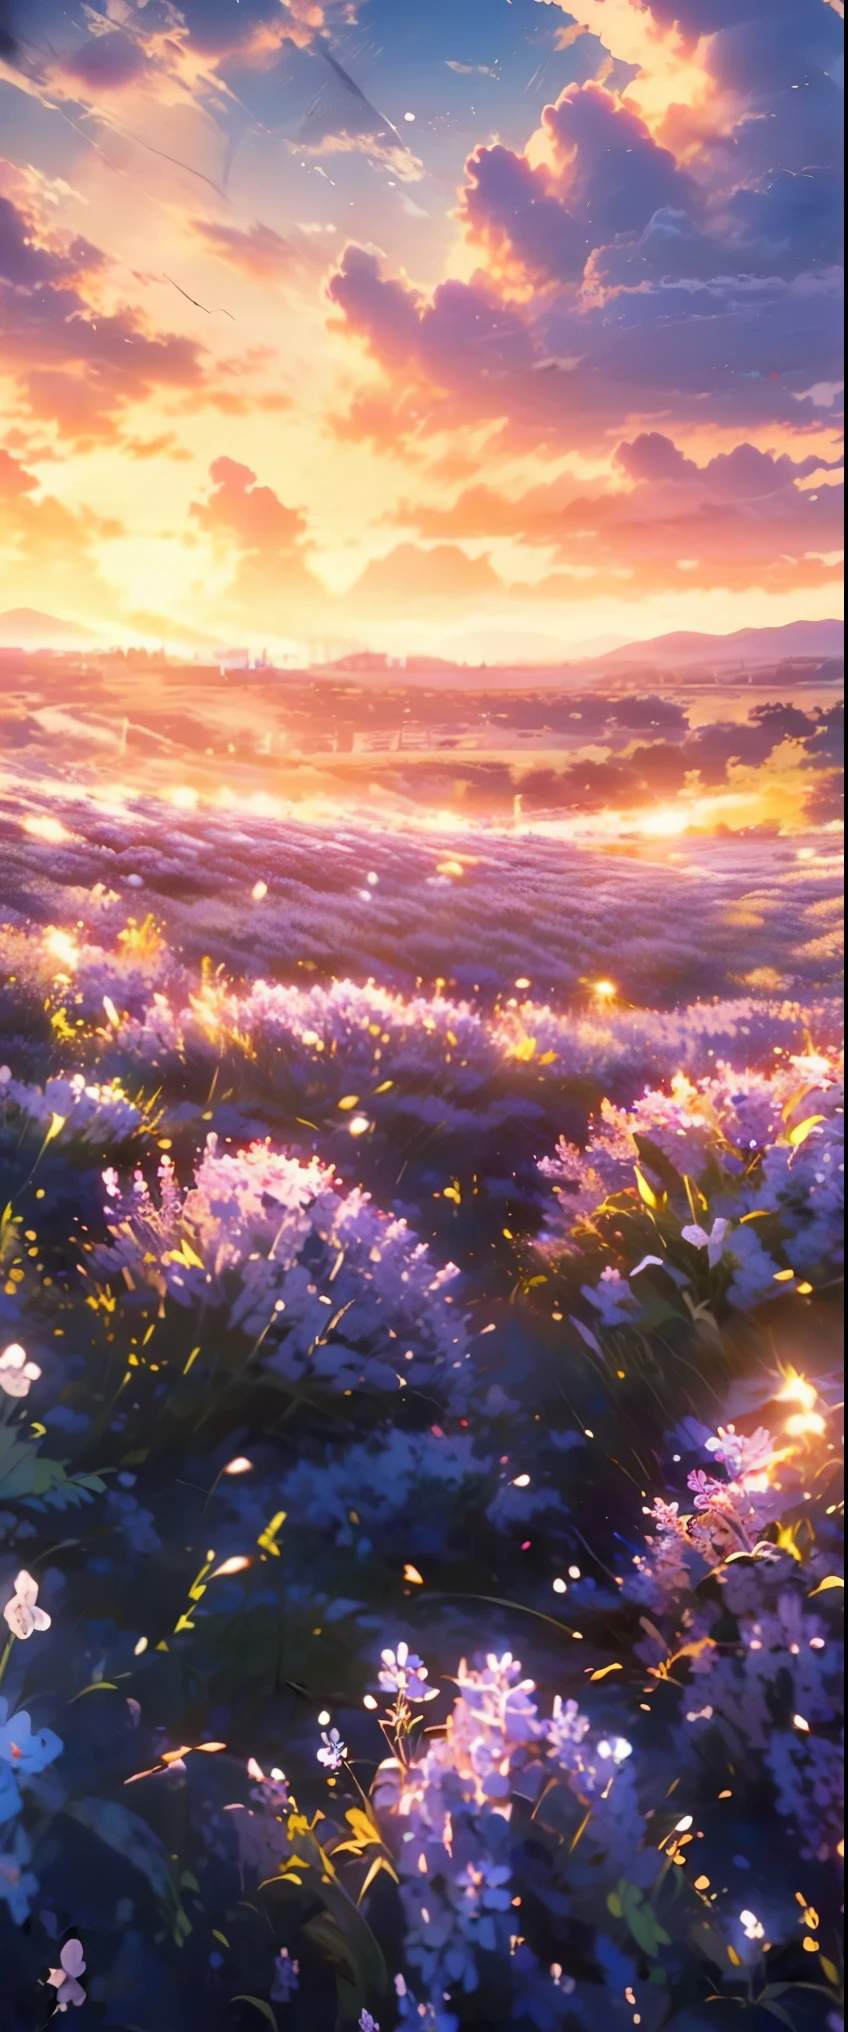 ((masterpiece, highest quality, Highest image quality, High resolution, photorealistic, Raw photo, 8K)), a field of purple flowers with the sun setting in the background, really beautiful nature, lilac sunrays, lavender fields in full bloom, beautiful nature, violet sky, purple beautiful sky, purple sunset, violet and yellow sunset, incredibly beautiful, in a lavender field in france, at purple sunset, beautiful place, field of fantasy flowers, purple sun, field of flowers, 